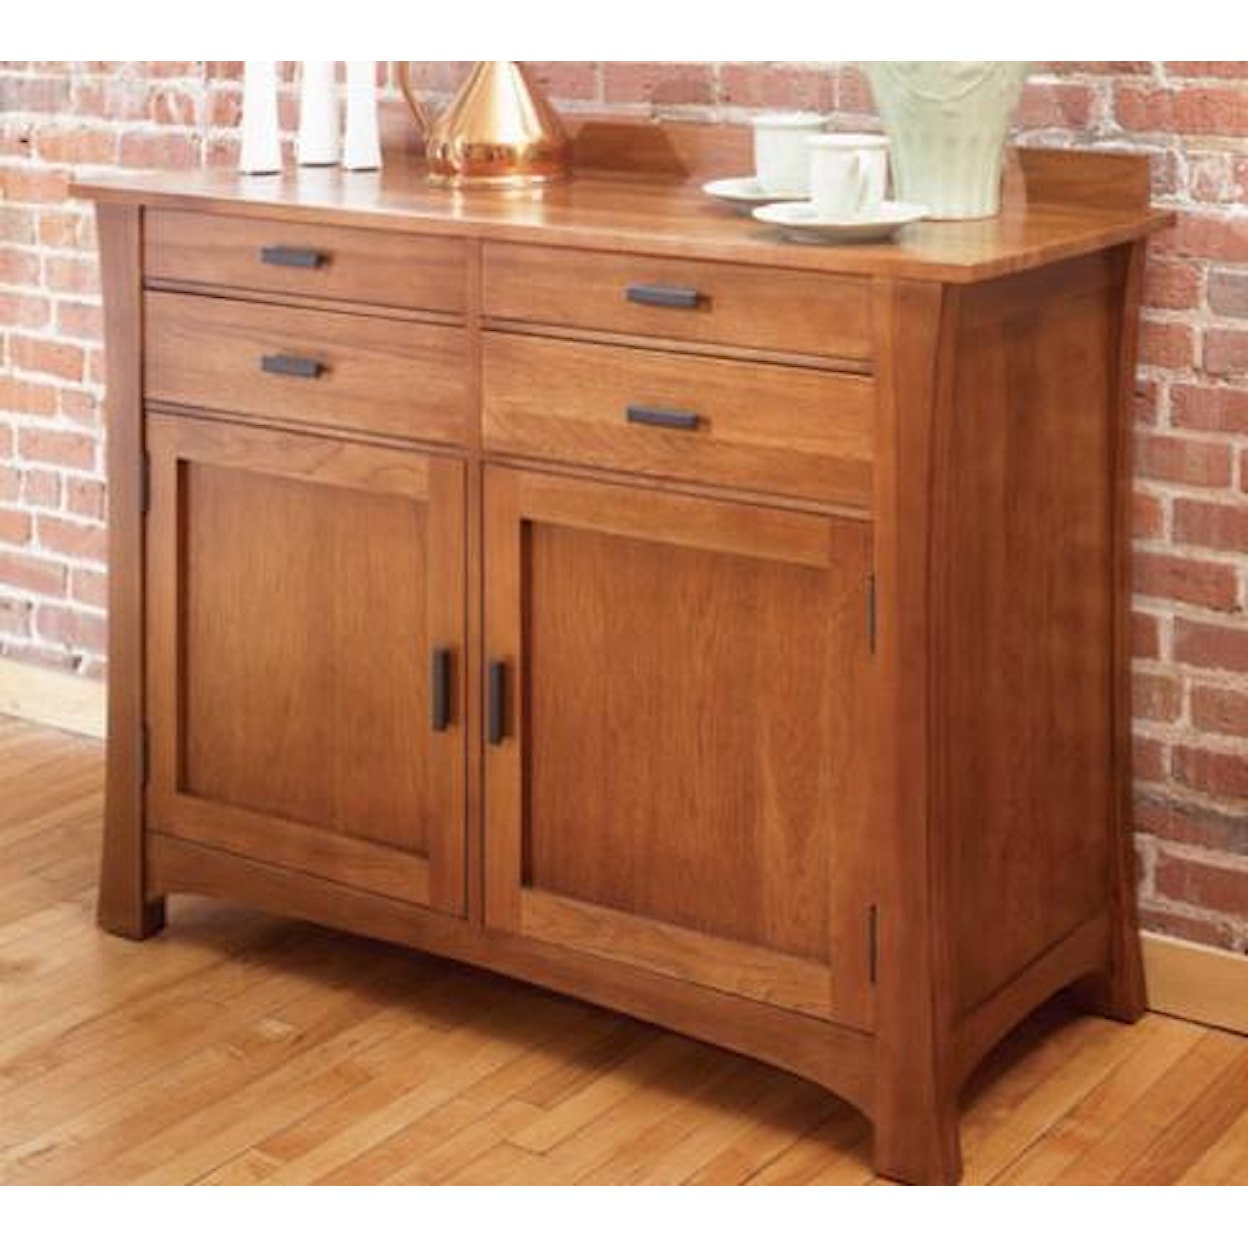 A-A Cattail Bungalow 4 Drawer 2 Door Sideboard